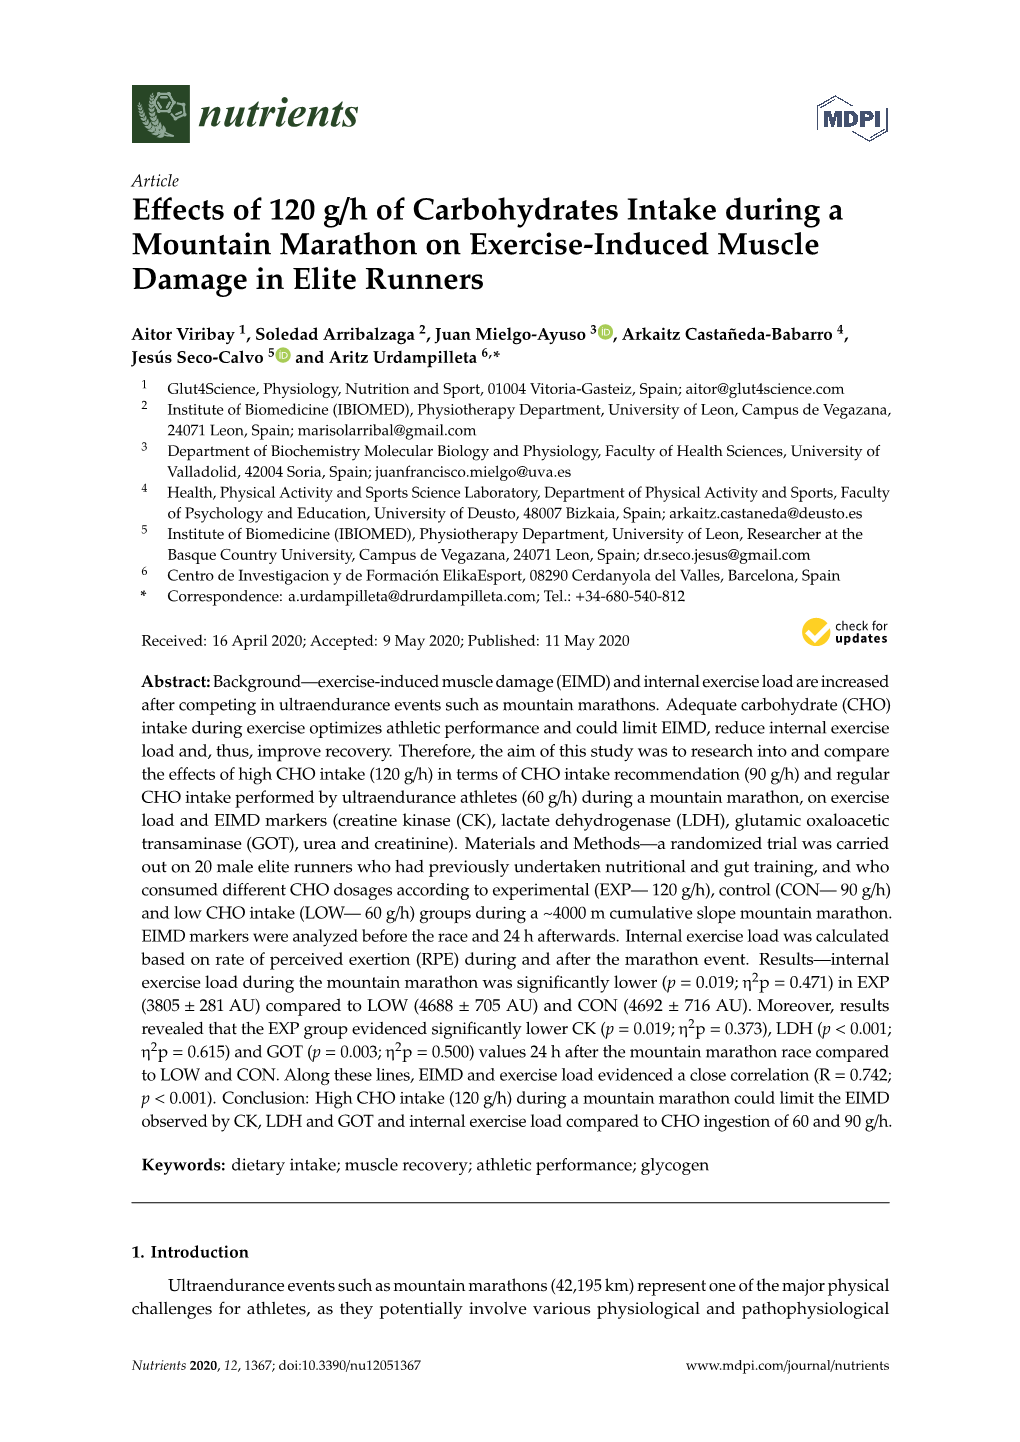 Effects of 120 G/H of Carbohydrates Intake During a Mountain Marathon on Exercise-Induced Muscle Damage in Elite Runners